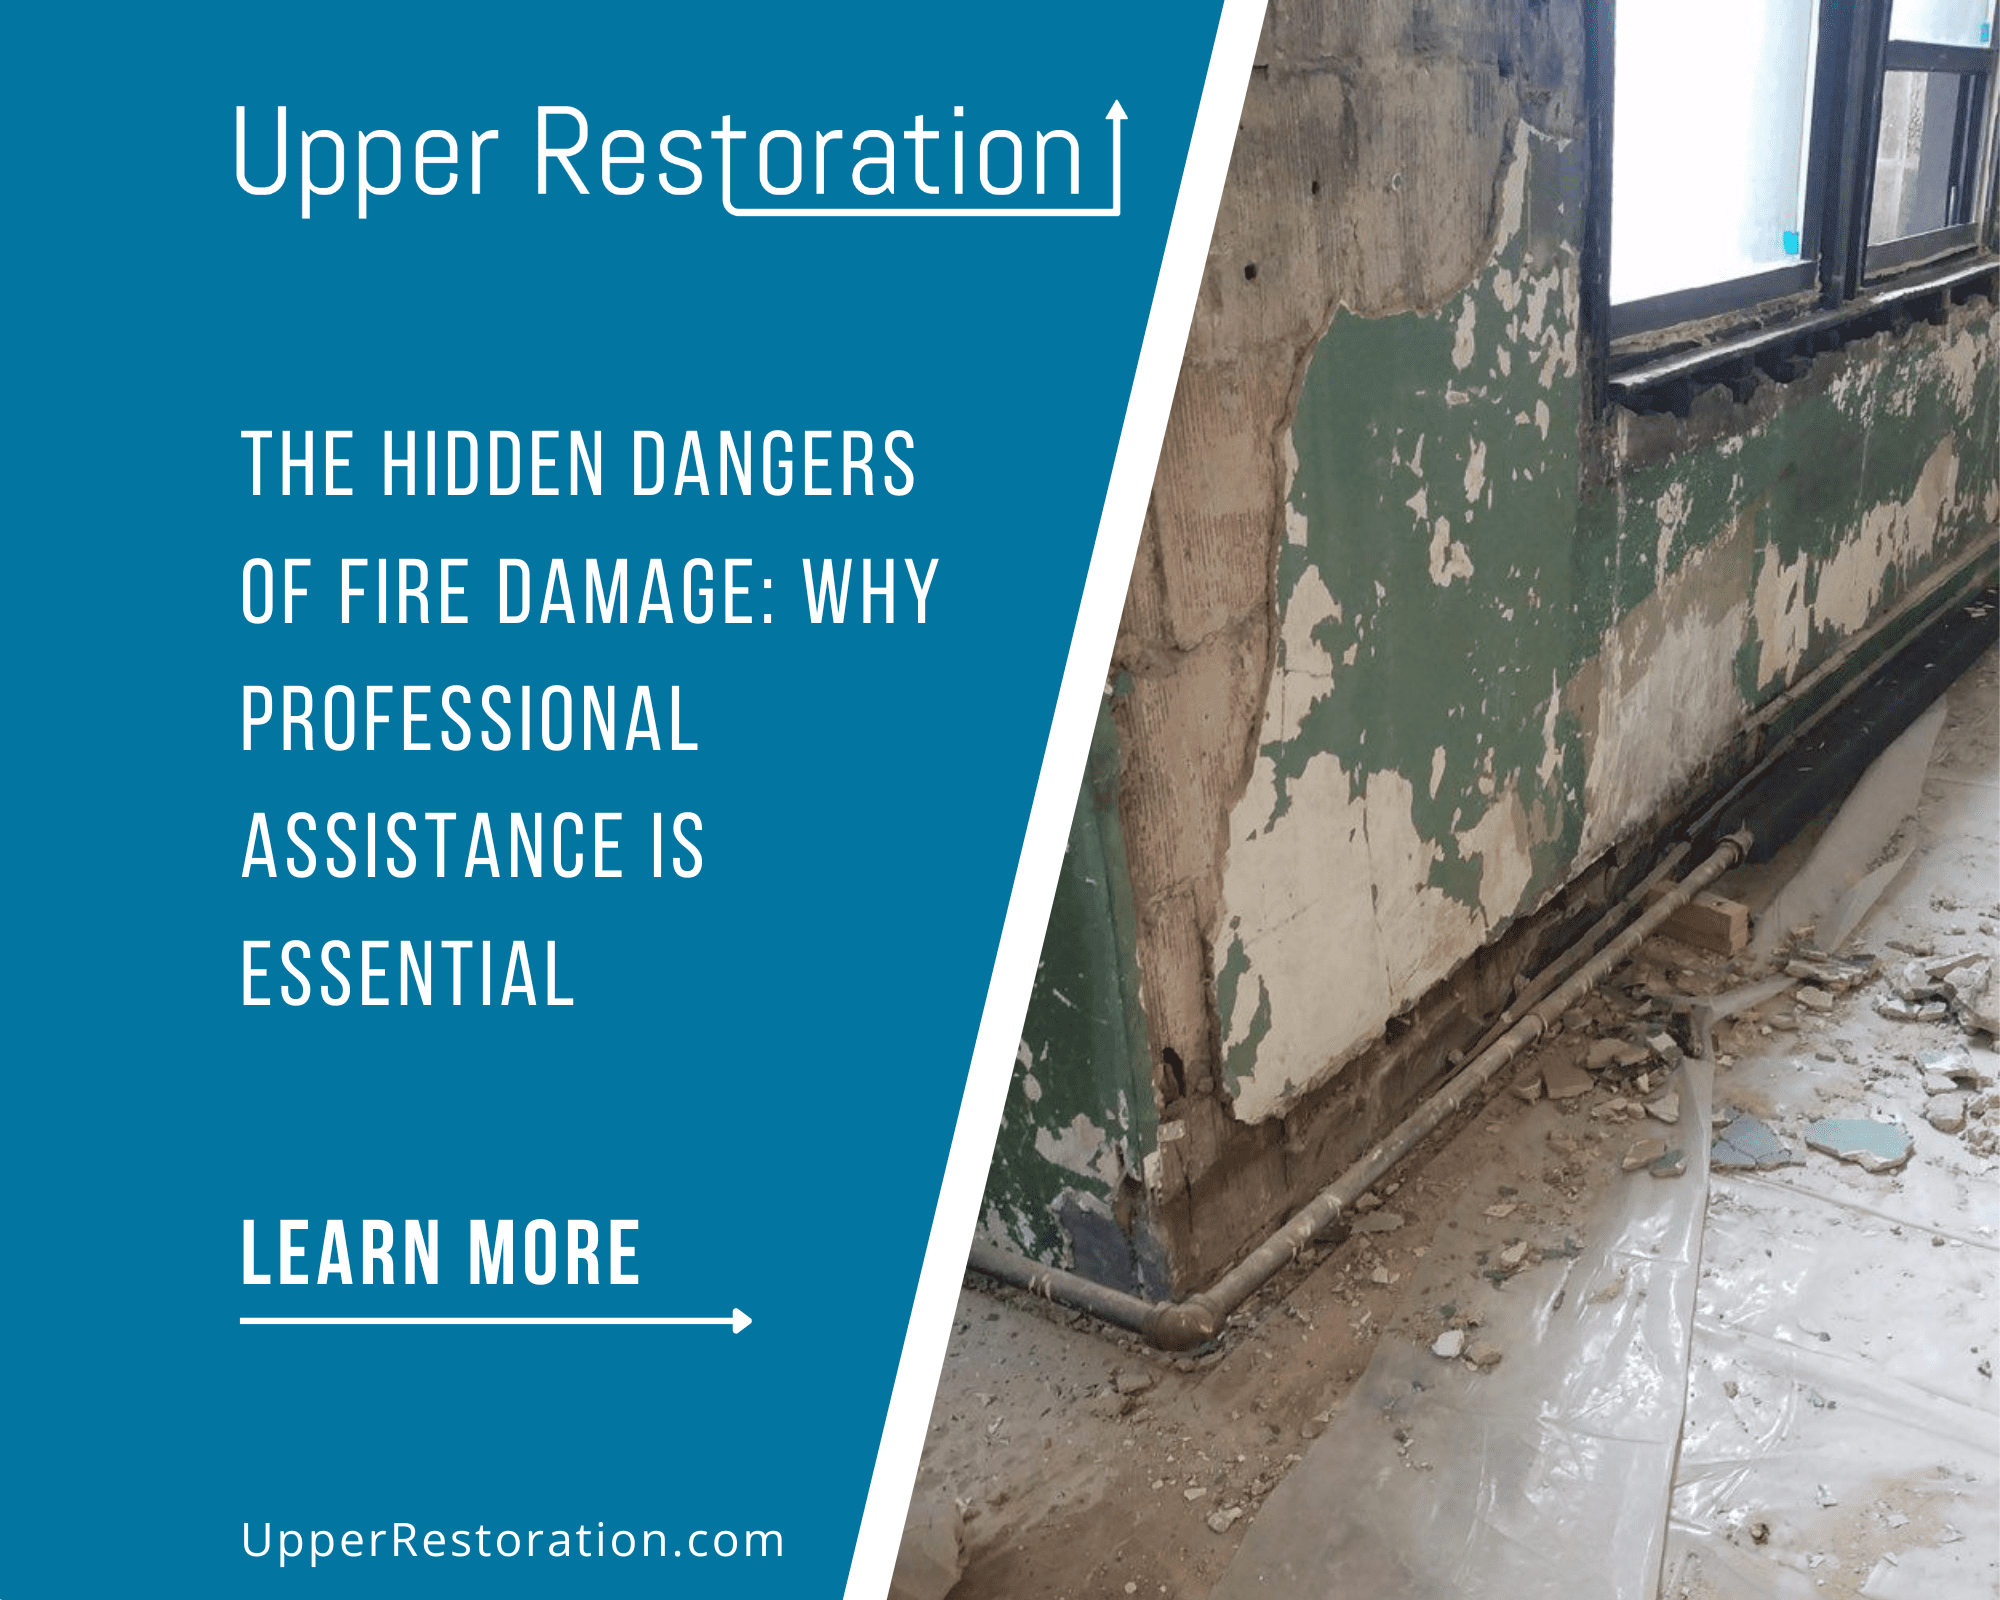 The Hidden Dangers of Fire Damage: Why Professional Assistance is Essential